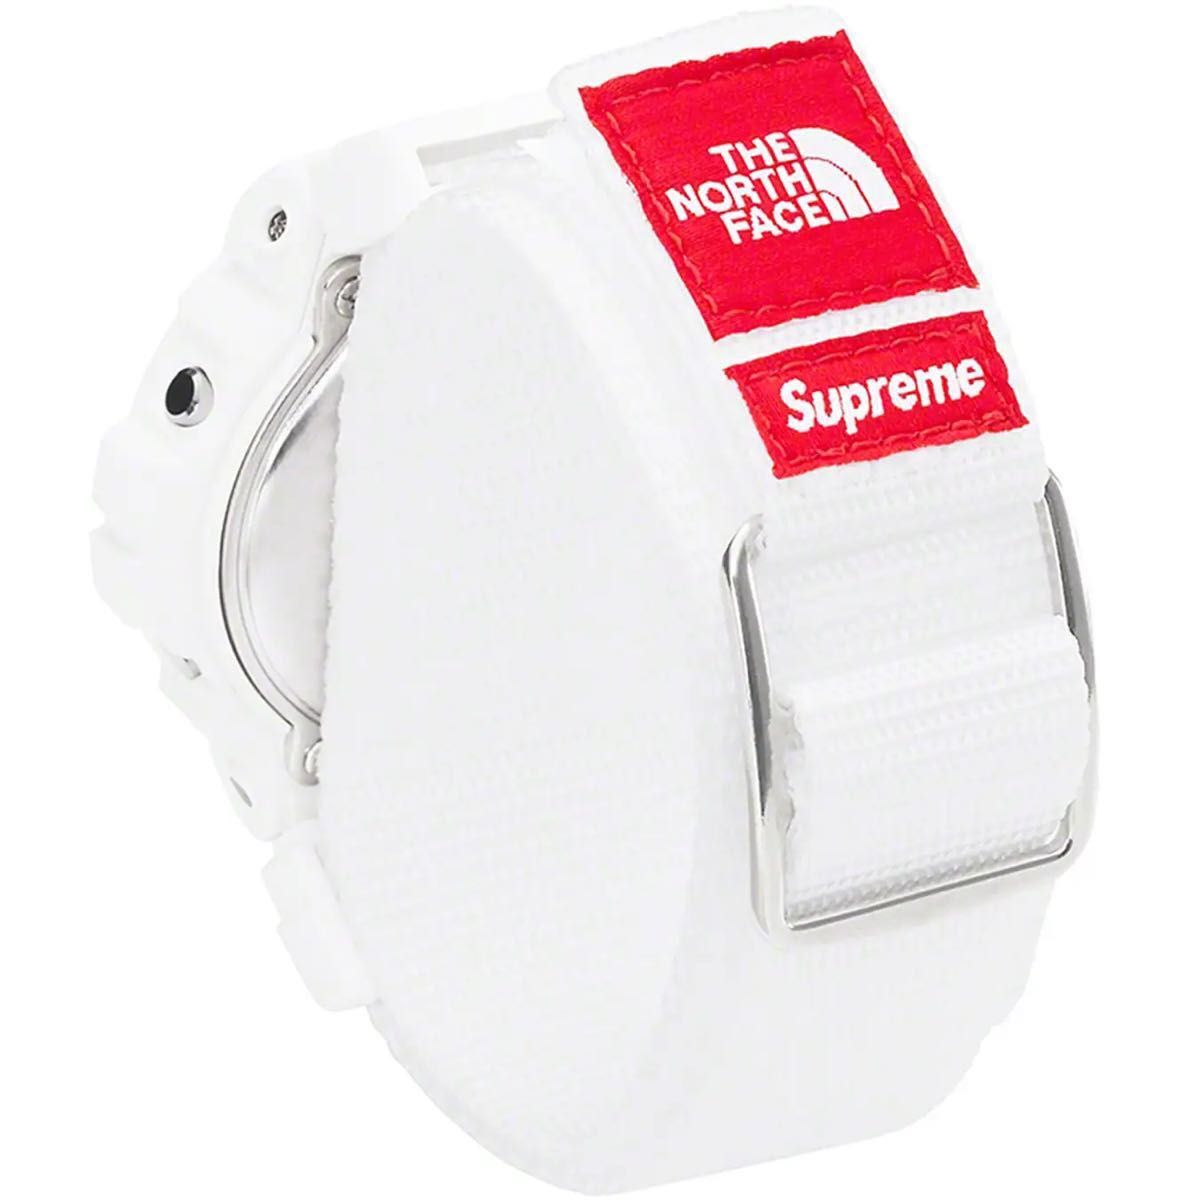 Supreme/The North Face G-SHOCK Watch